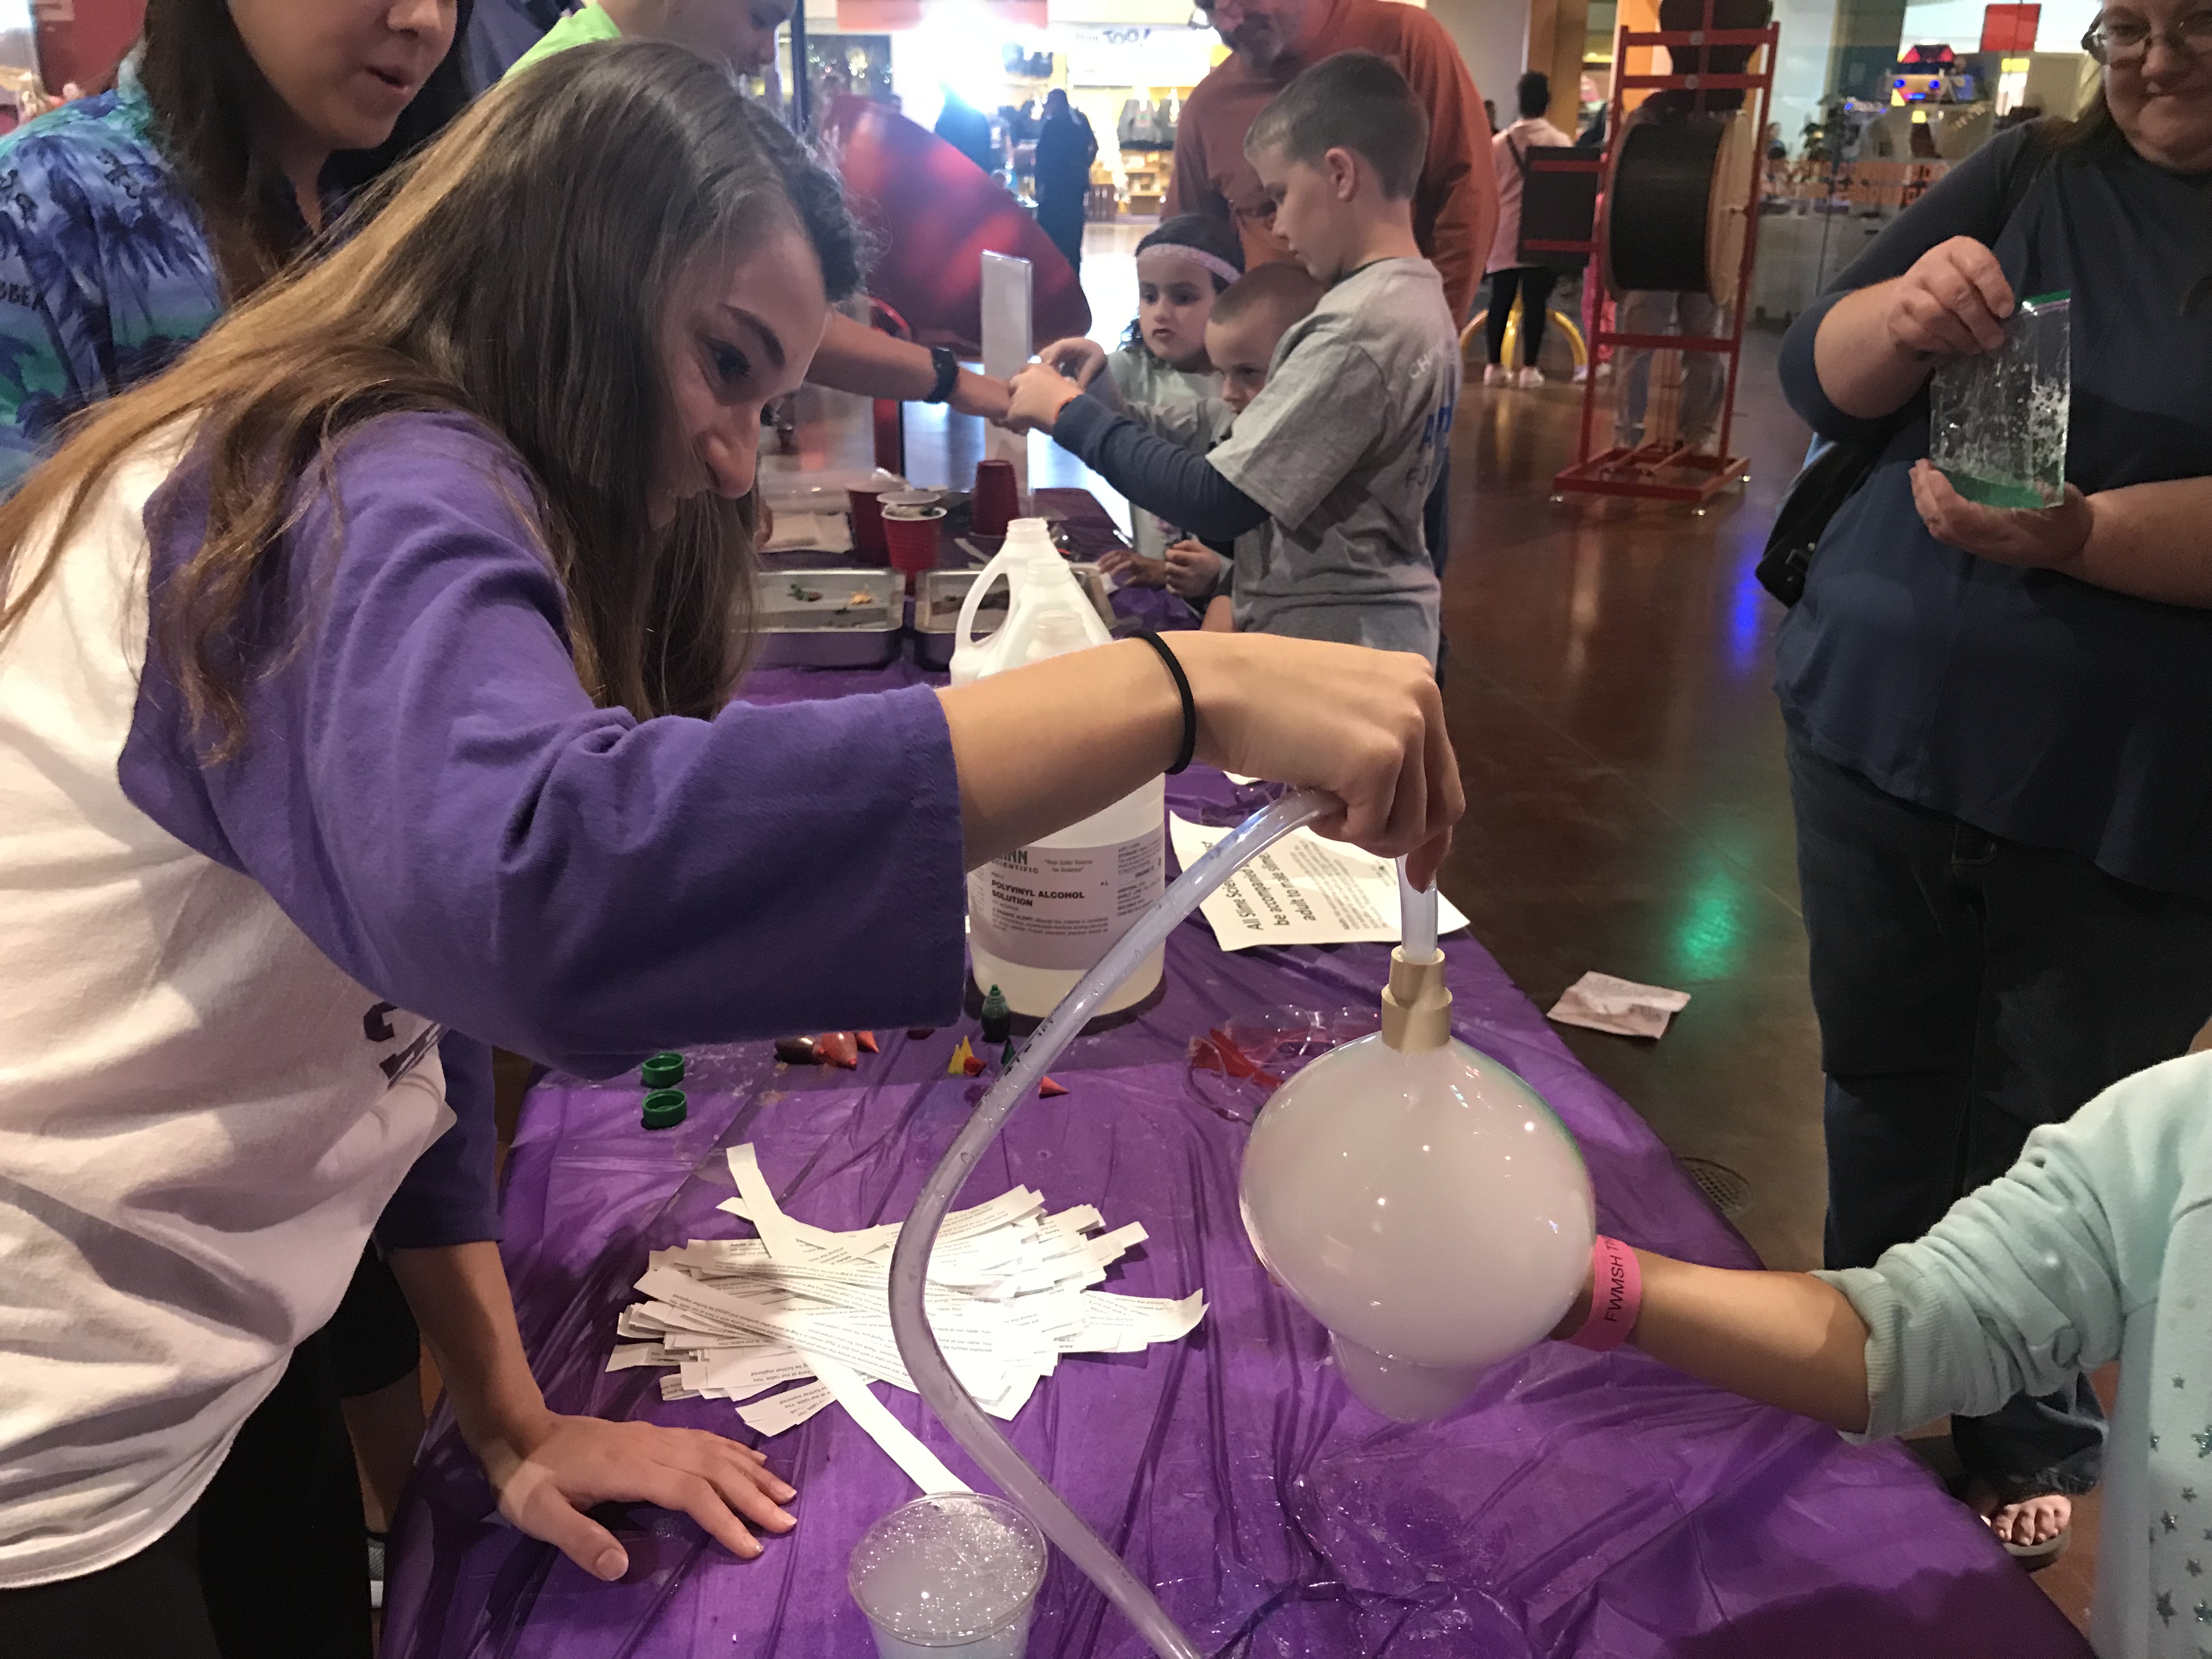 Chemistry Club is very active on the TCU campus providing activities for TCU students, families, and fans throughout the year.